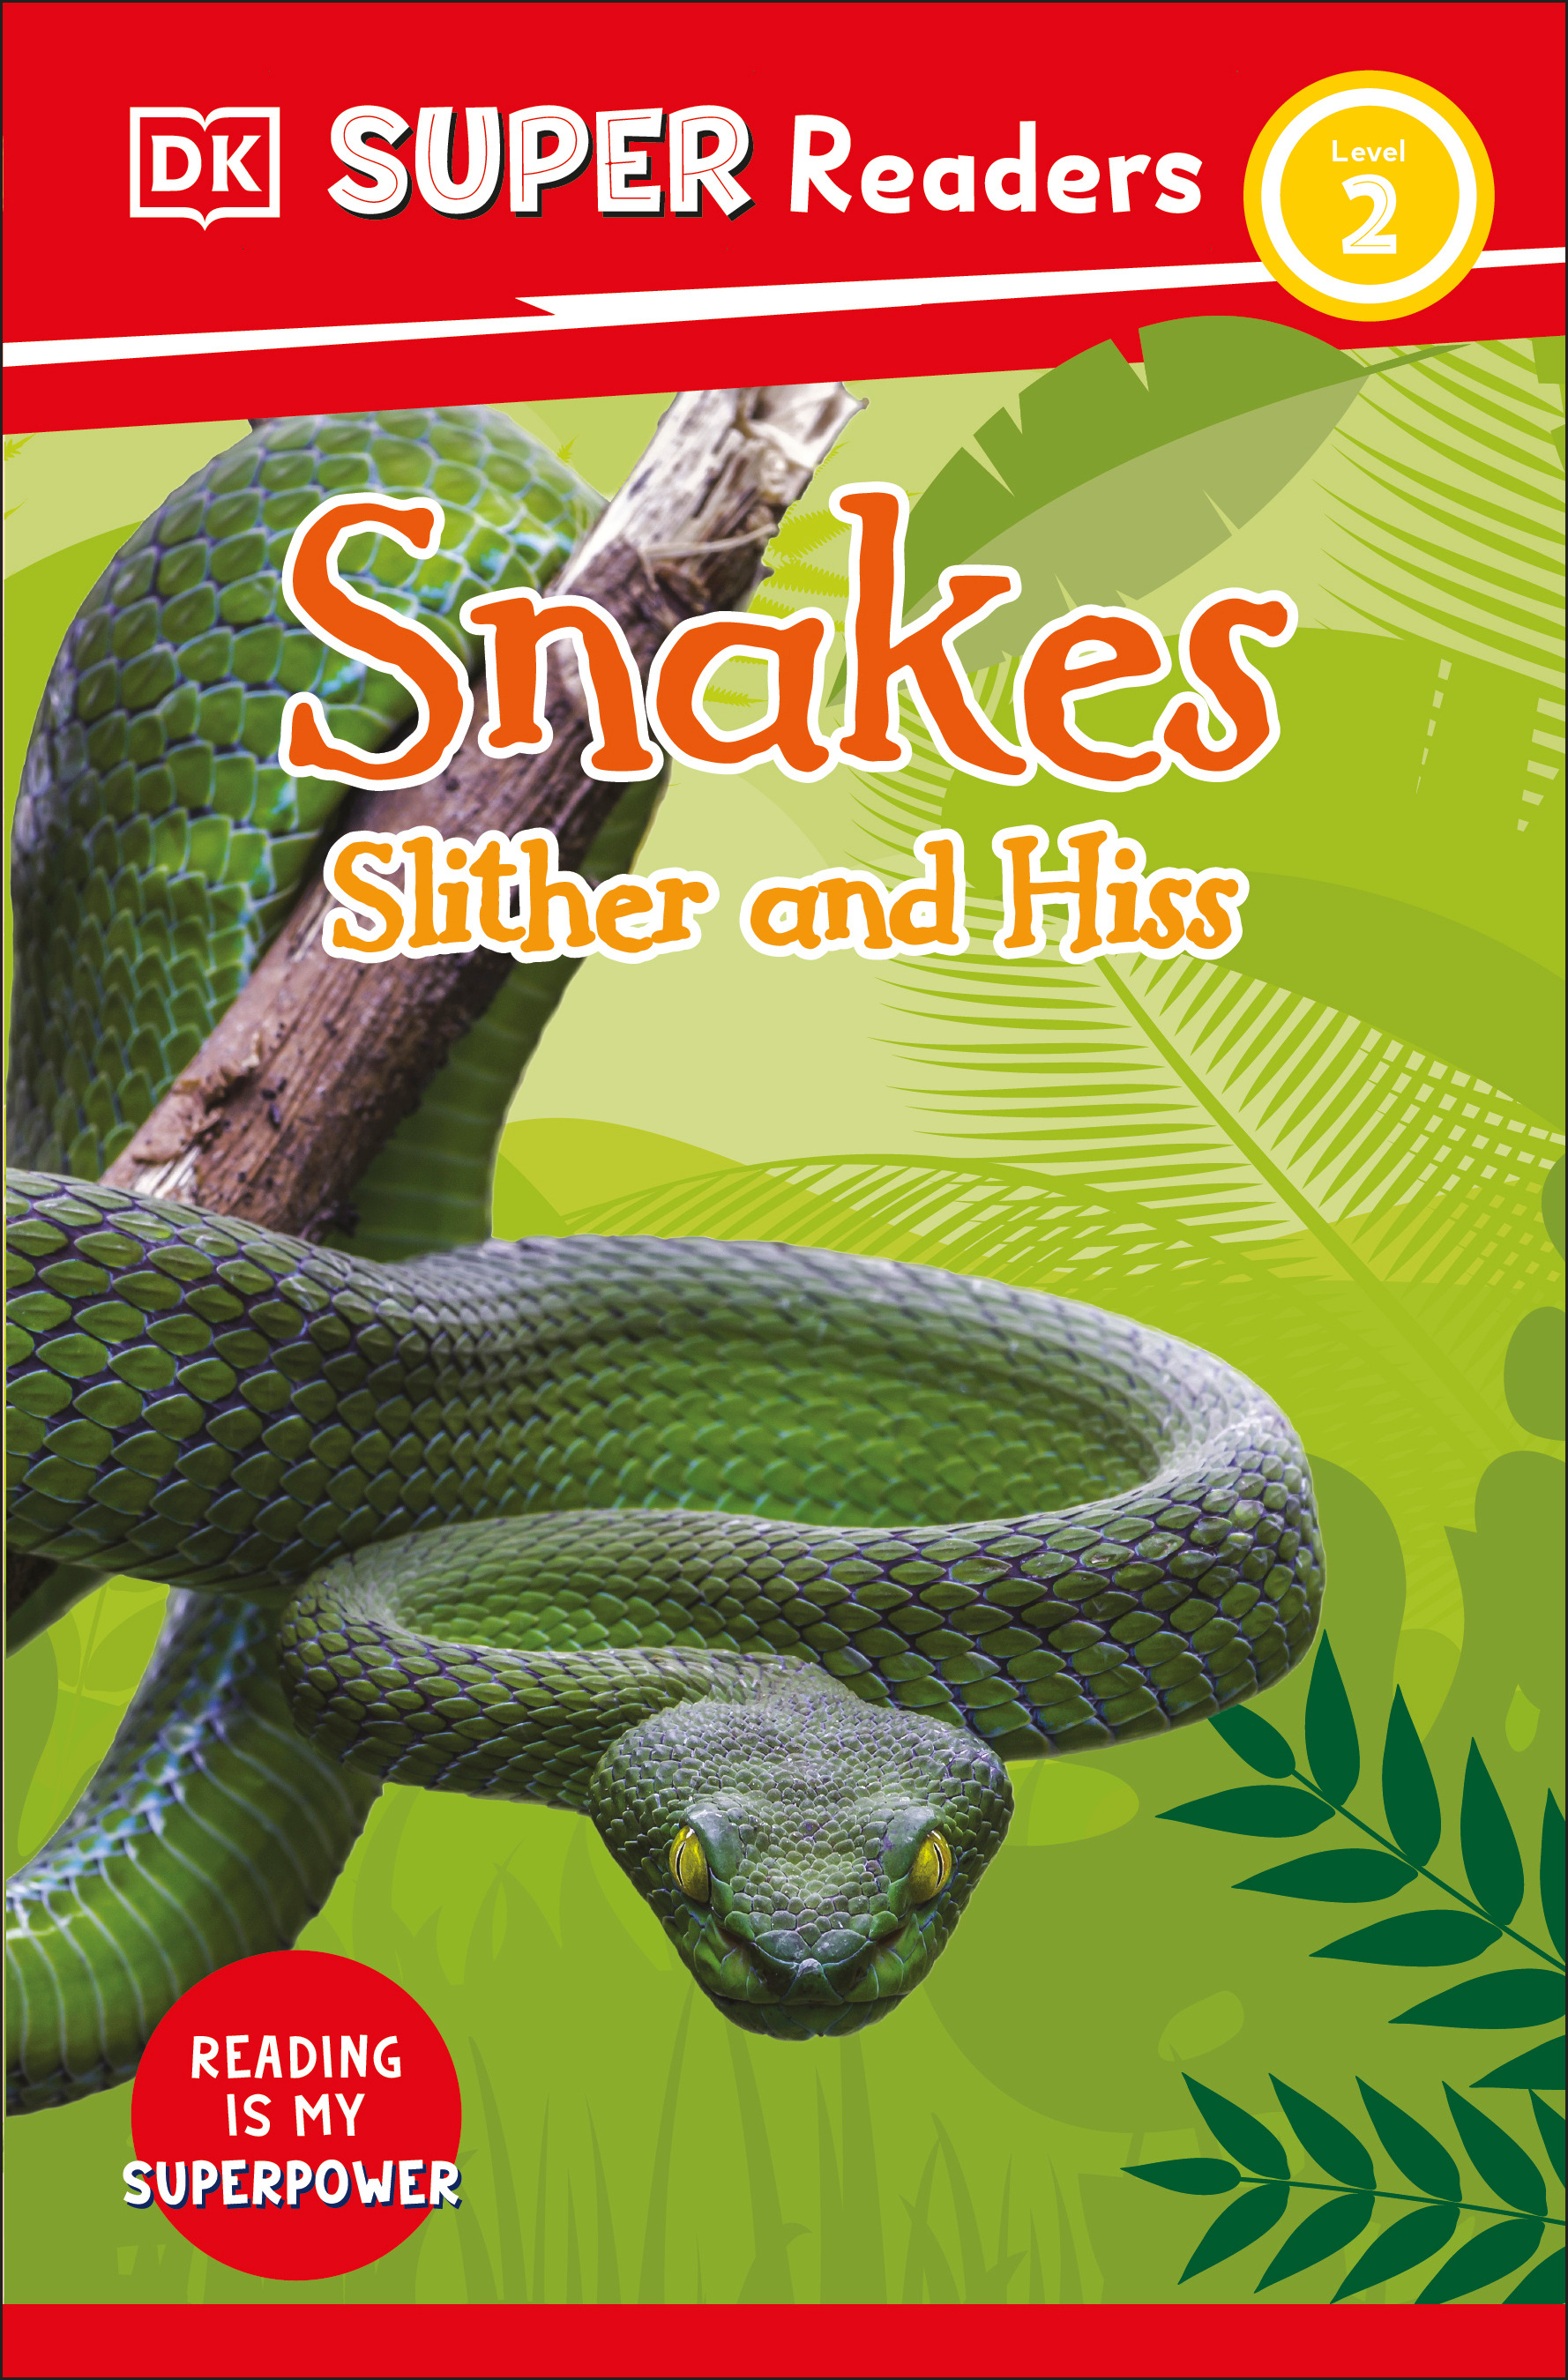 DK Super Readers Level 2 - Snakes Slither and Hiss | 